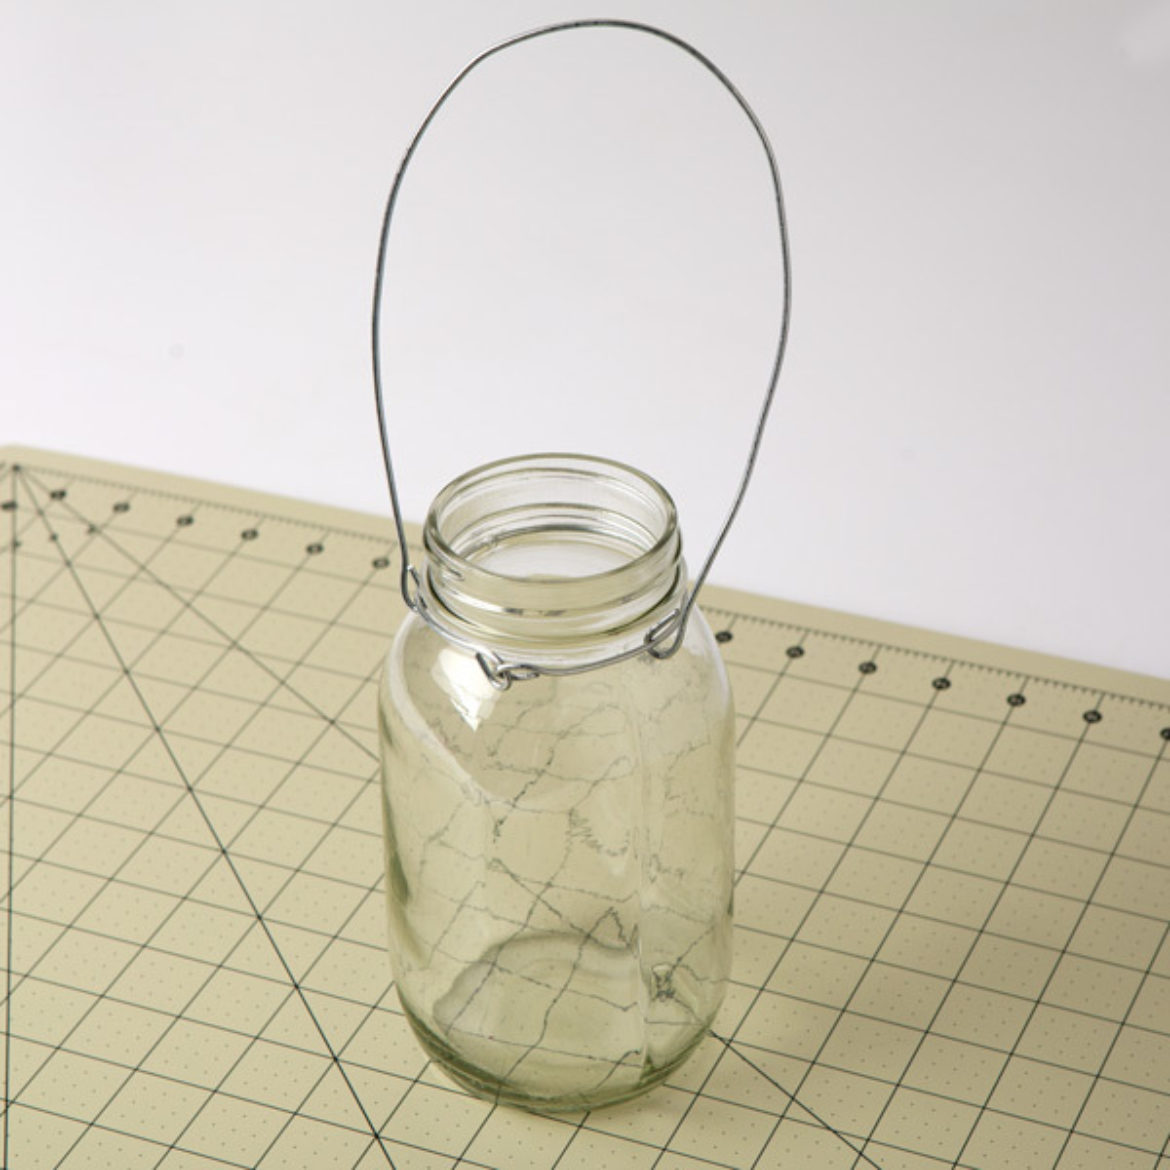 connect the ends of the circular piece by interlocking the loops on either end around a jar